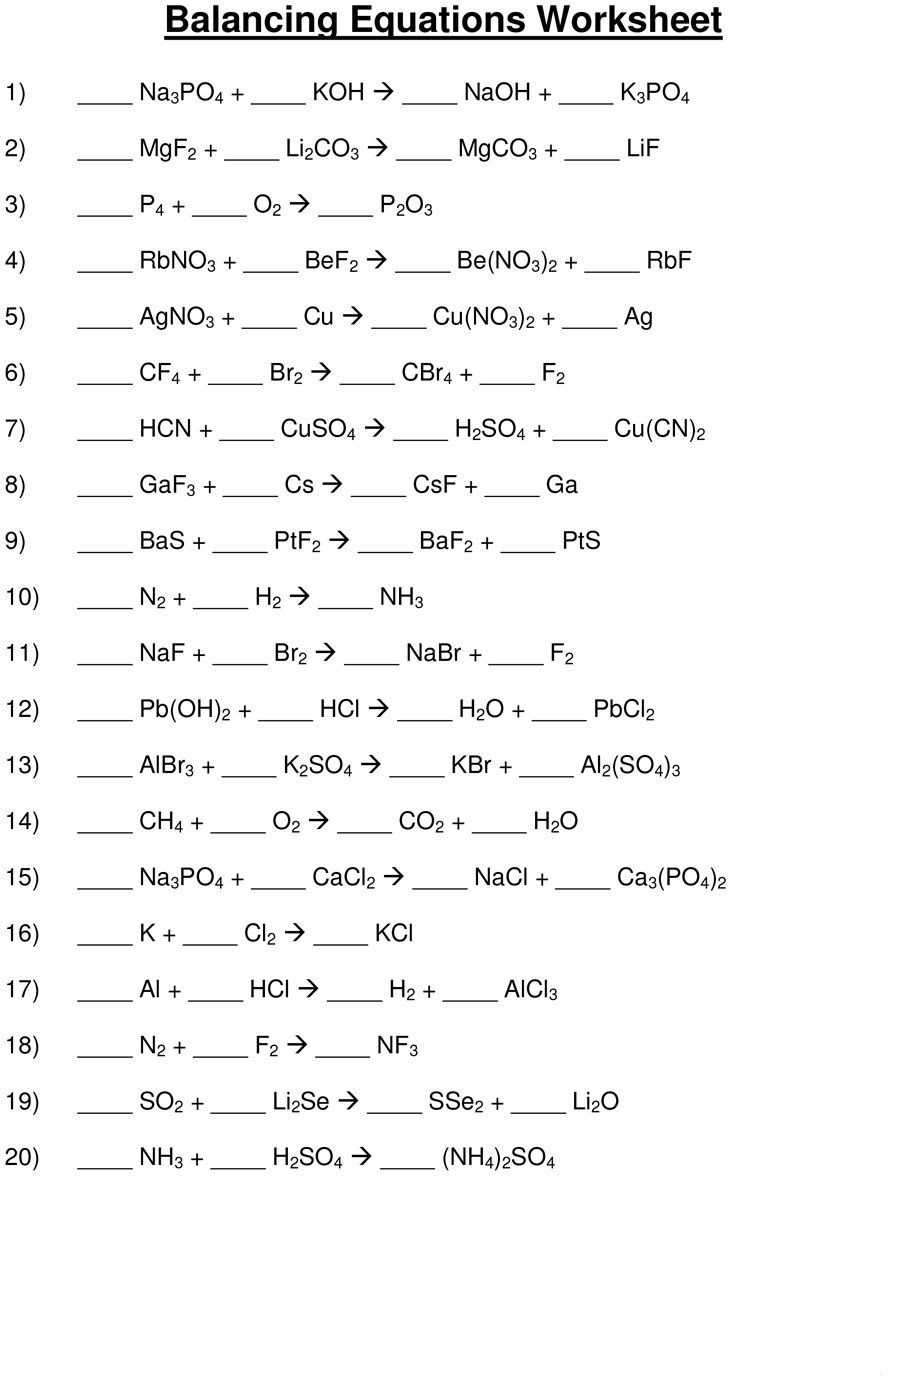 Do You Find Balancing The Chemical Equation A Daunting Task Download